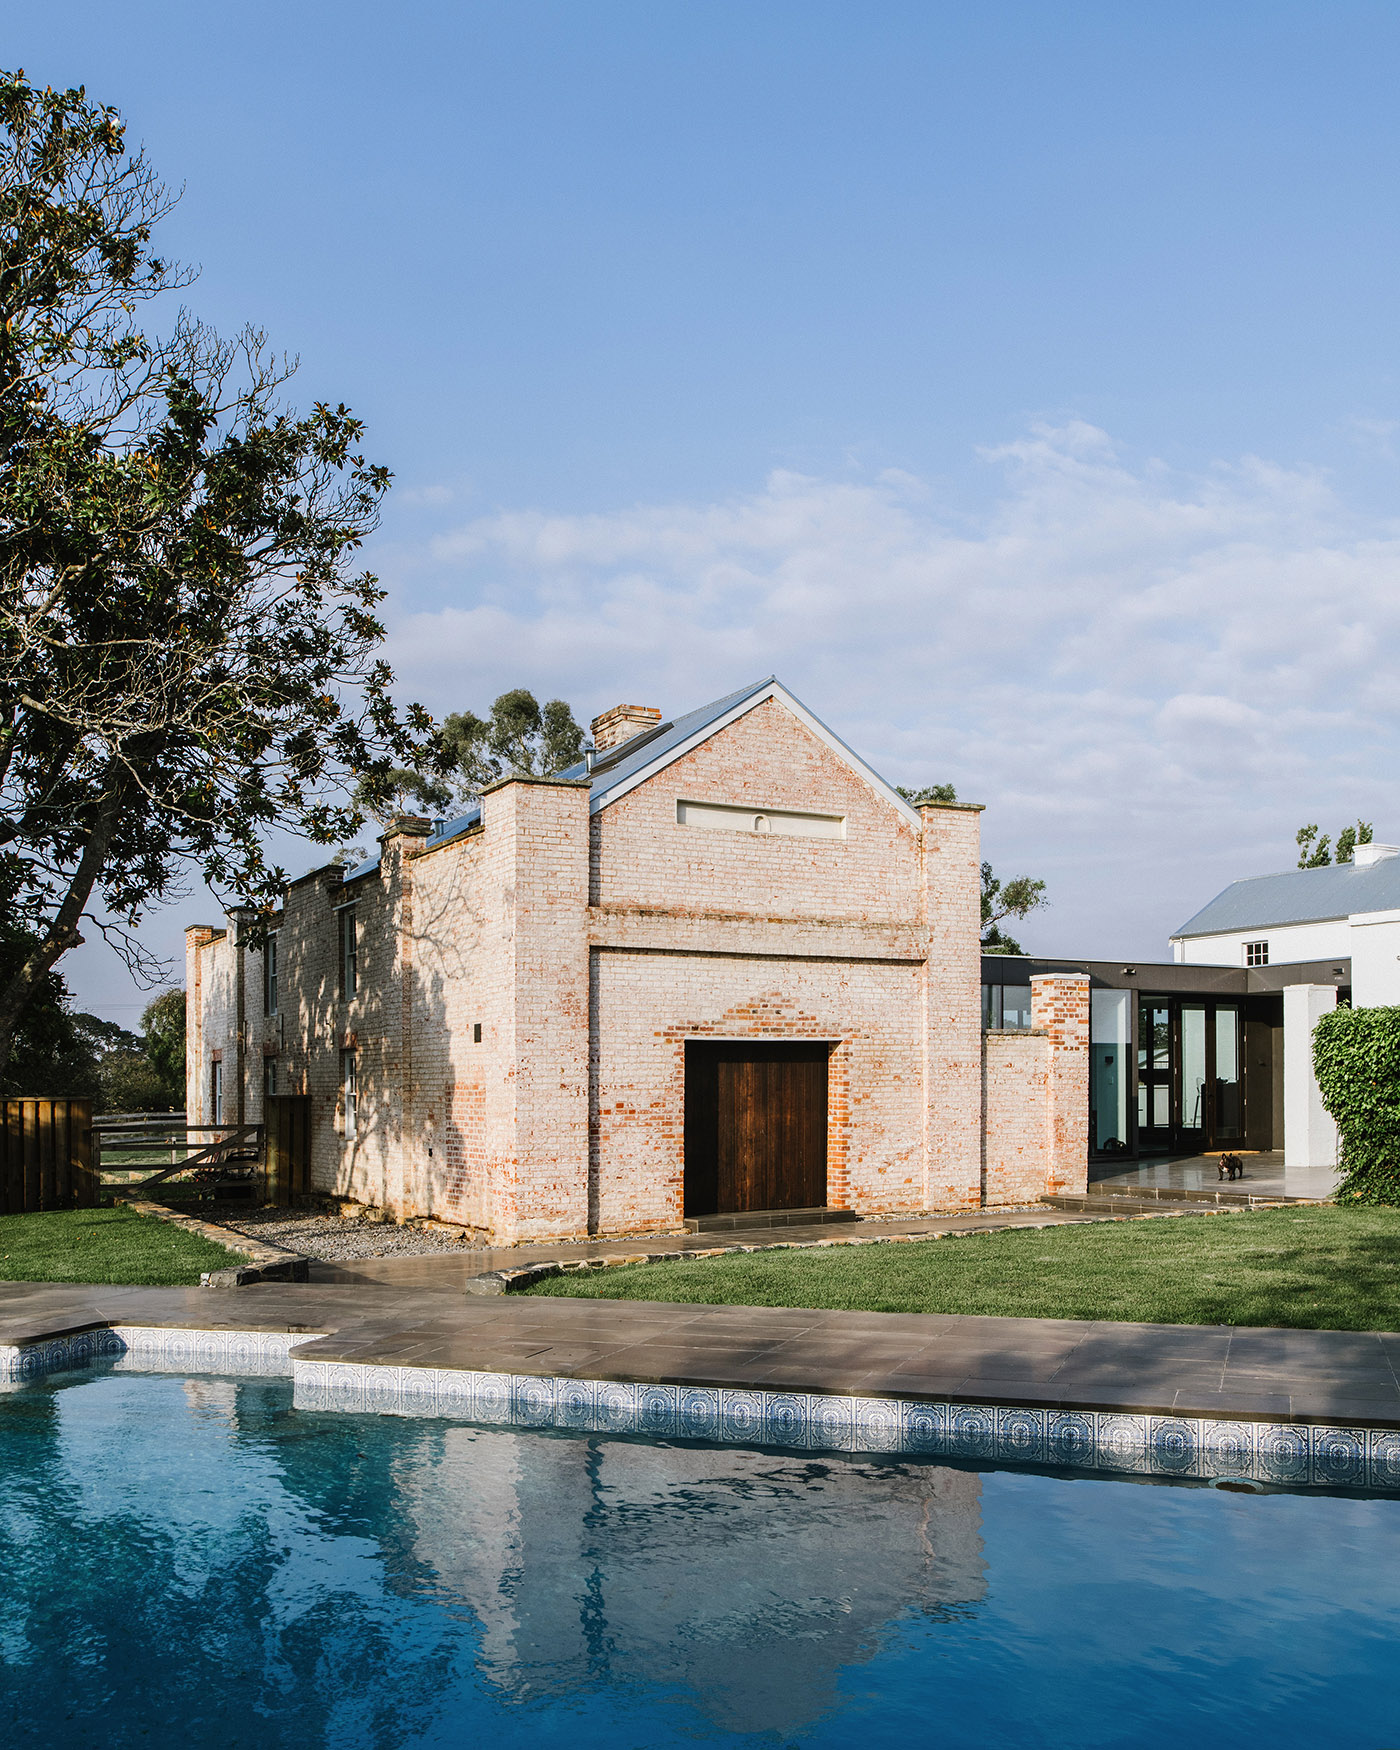 Symmons Plains Homestead: austere Georgian heritage grappling with a renovation shaped by modern trends